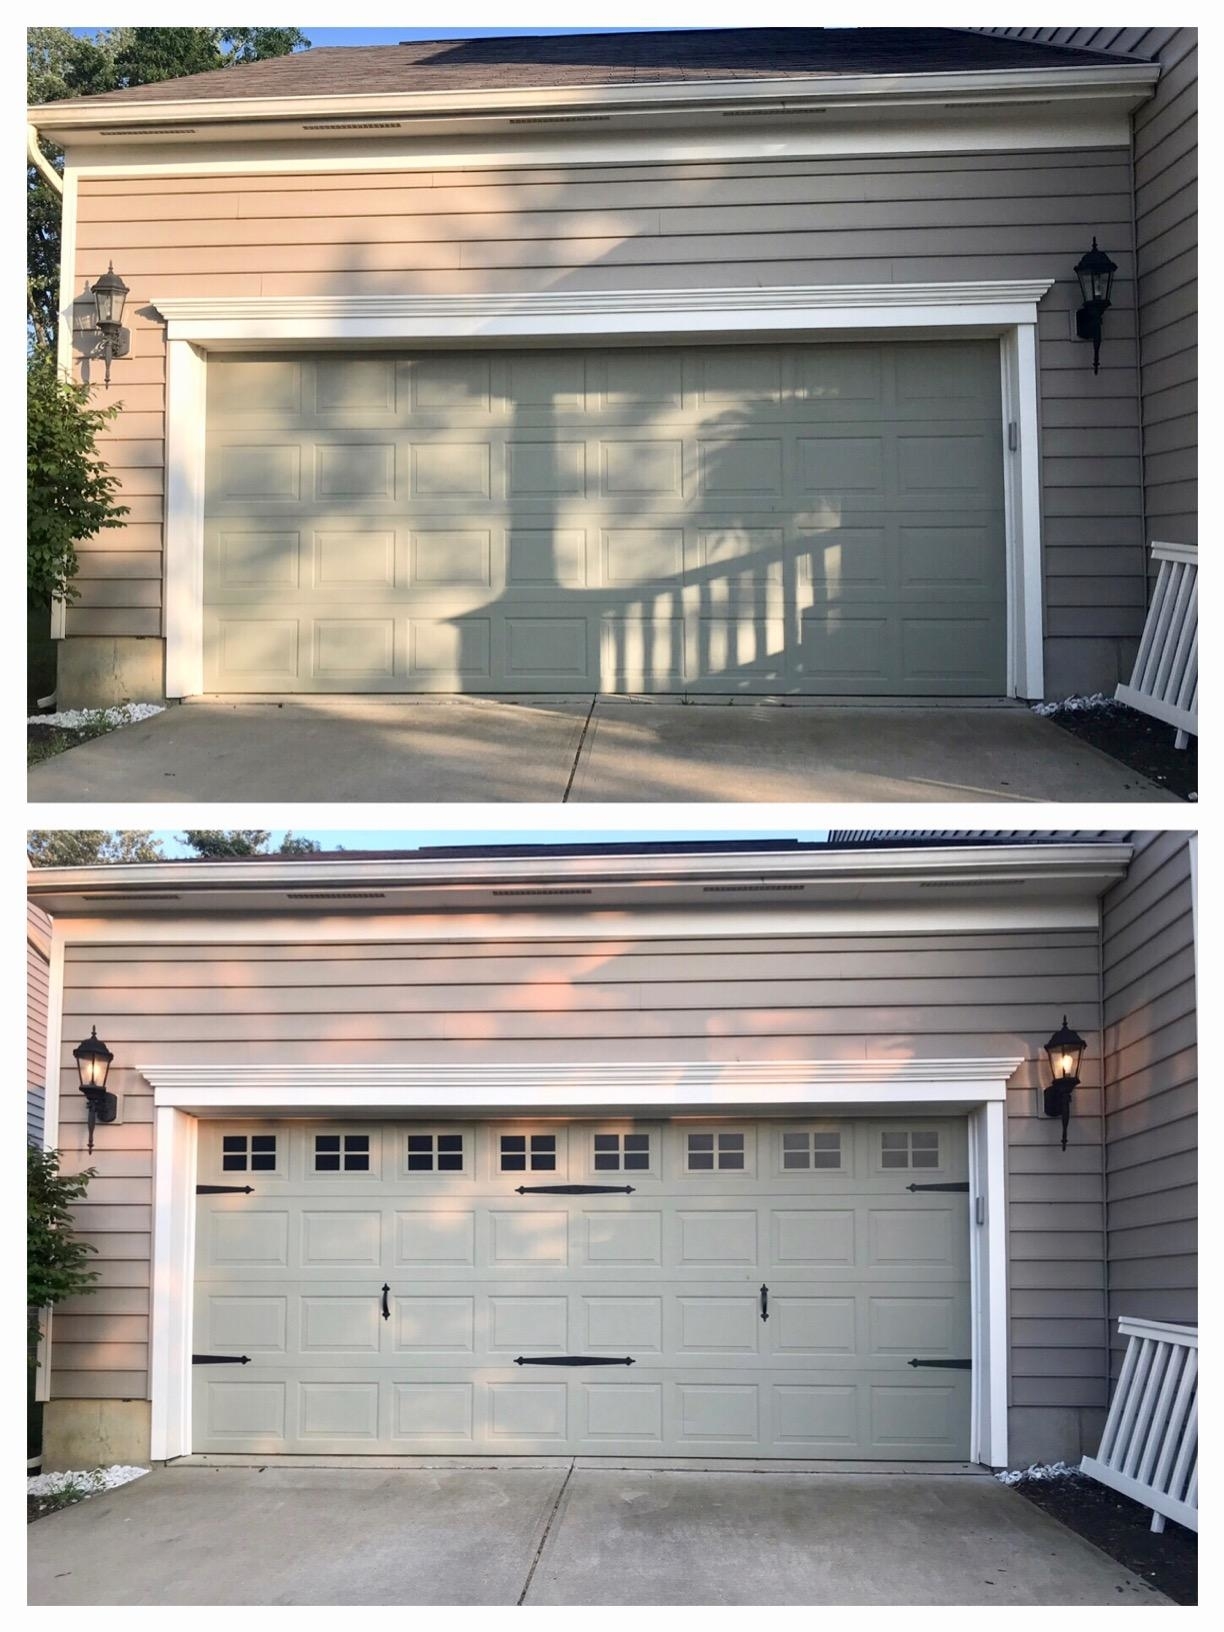 Before and after of a garage door updated with decorative handles, hinges, and windows